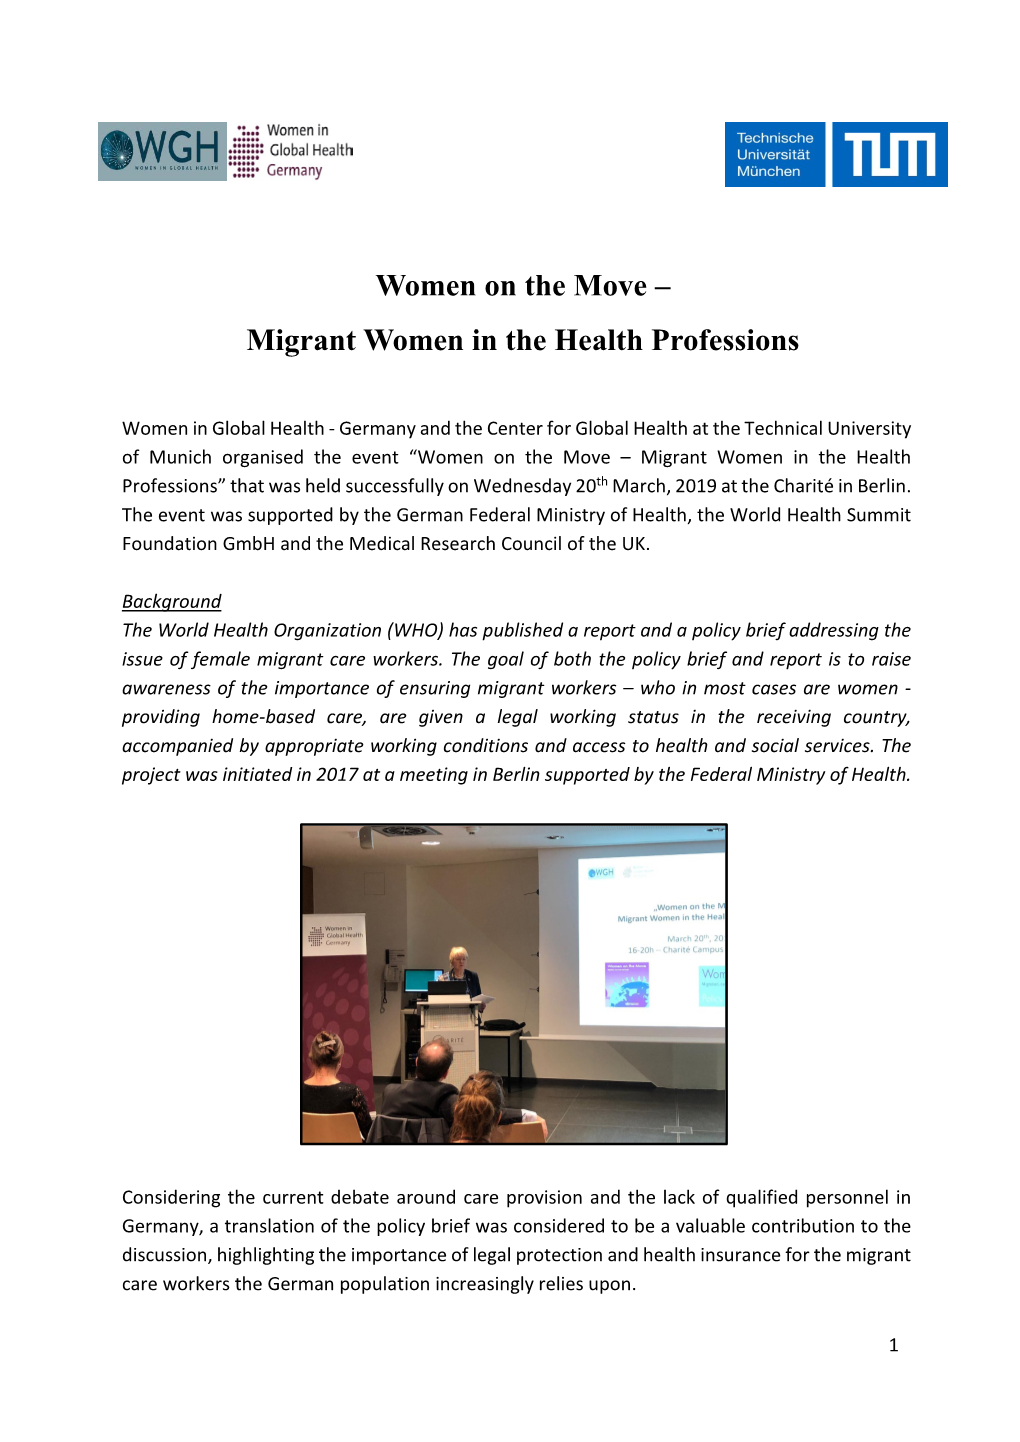 Women on the Move – Migrant Women in the Health Professions